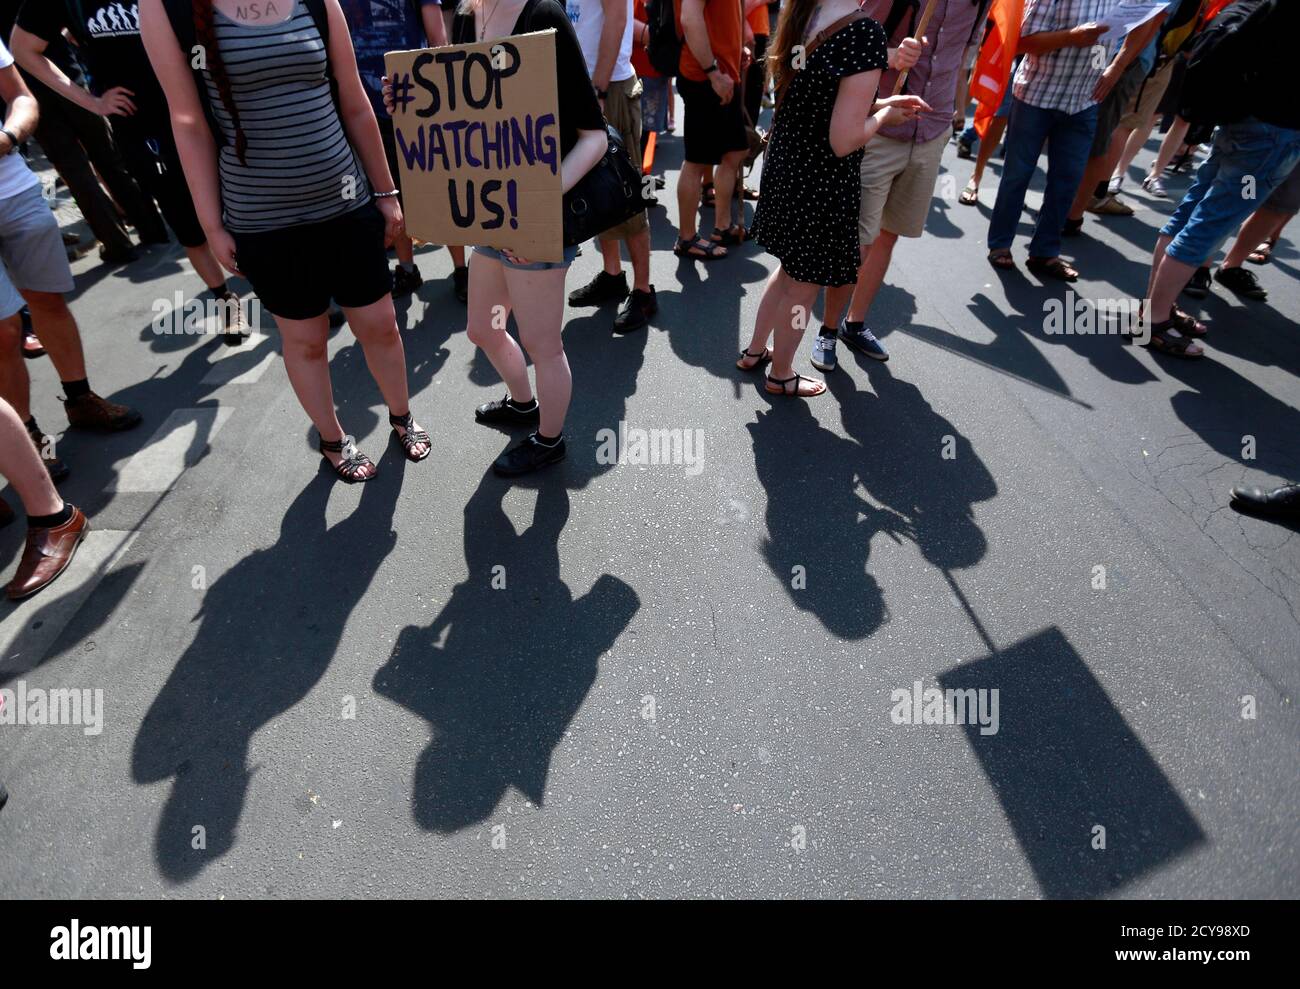 Protesters cast their shadows during a demonstration against secret monitoring programmes PRISM, TEMPORA, INDECT and showing solidarity with whistleblowers Edward Snowden, Bradley Manning and others in Berlin July 27, 2013. REUTERS/Pawel Kopczynski (GERMANY  - Tags: CIVIL UNREST) Stock Photo